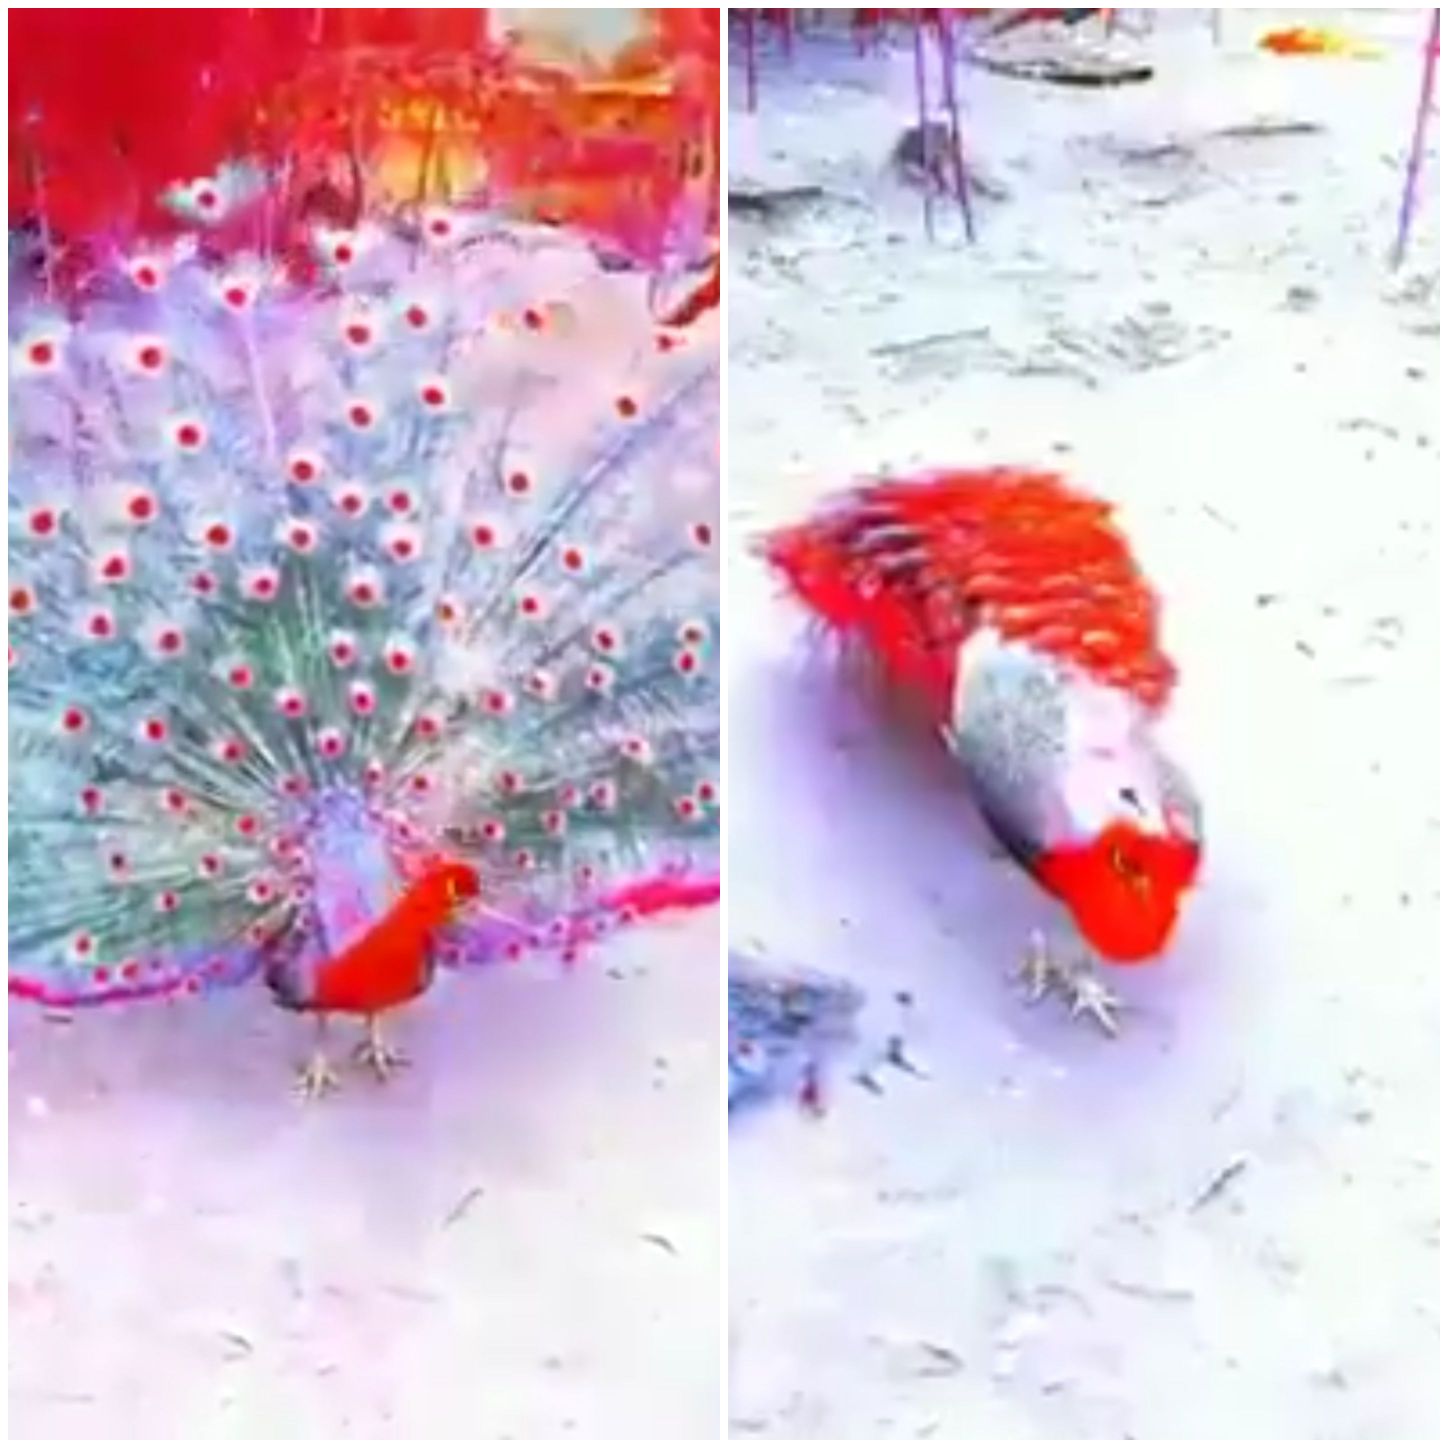 This Red Peacock is extremely beautiful